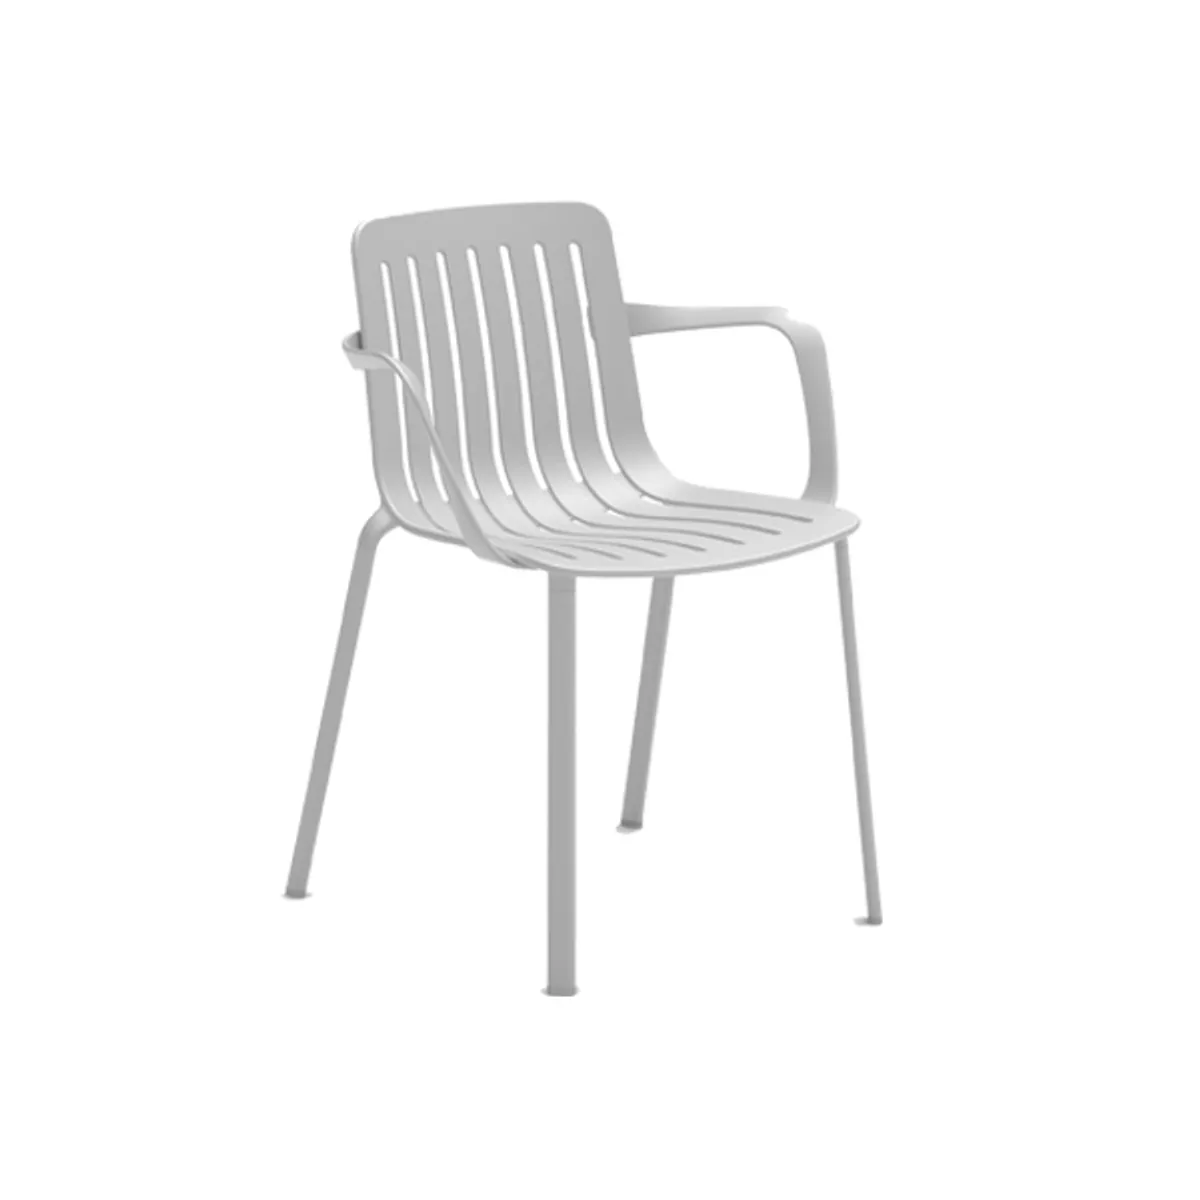 Plato armchair Inside Out Contracts